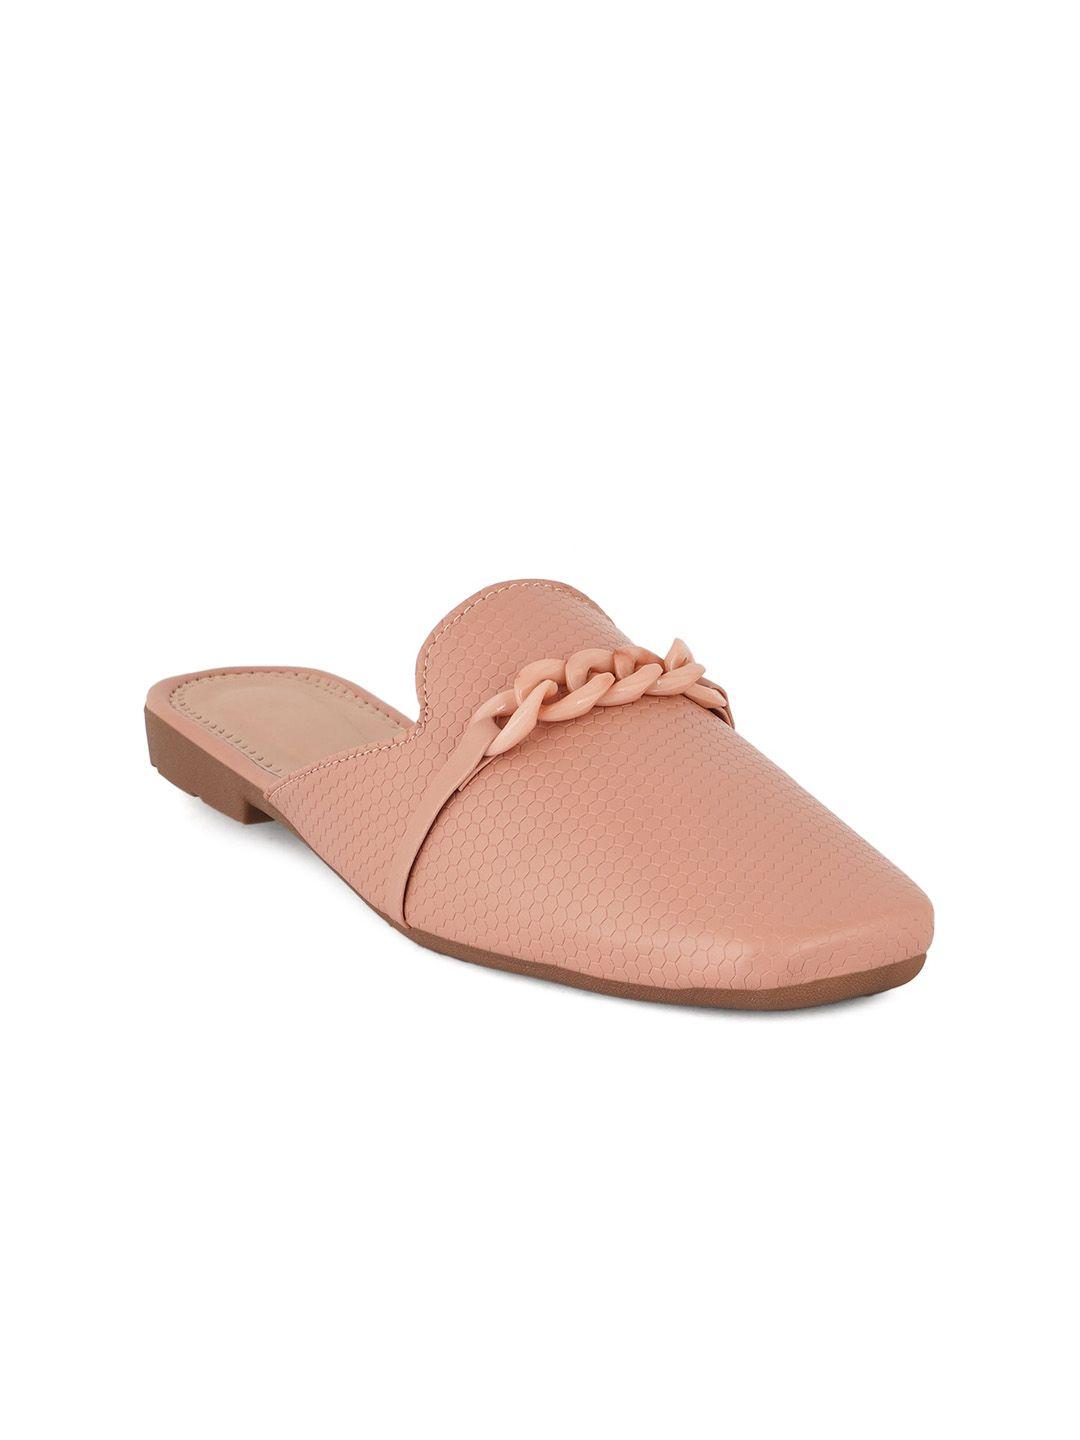 style shoes women peach-coloured mules flats